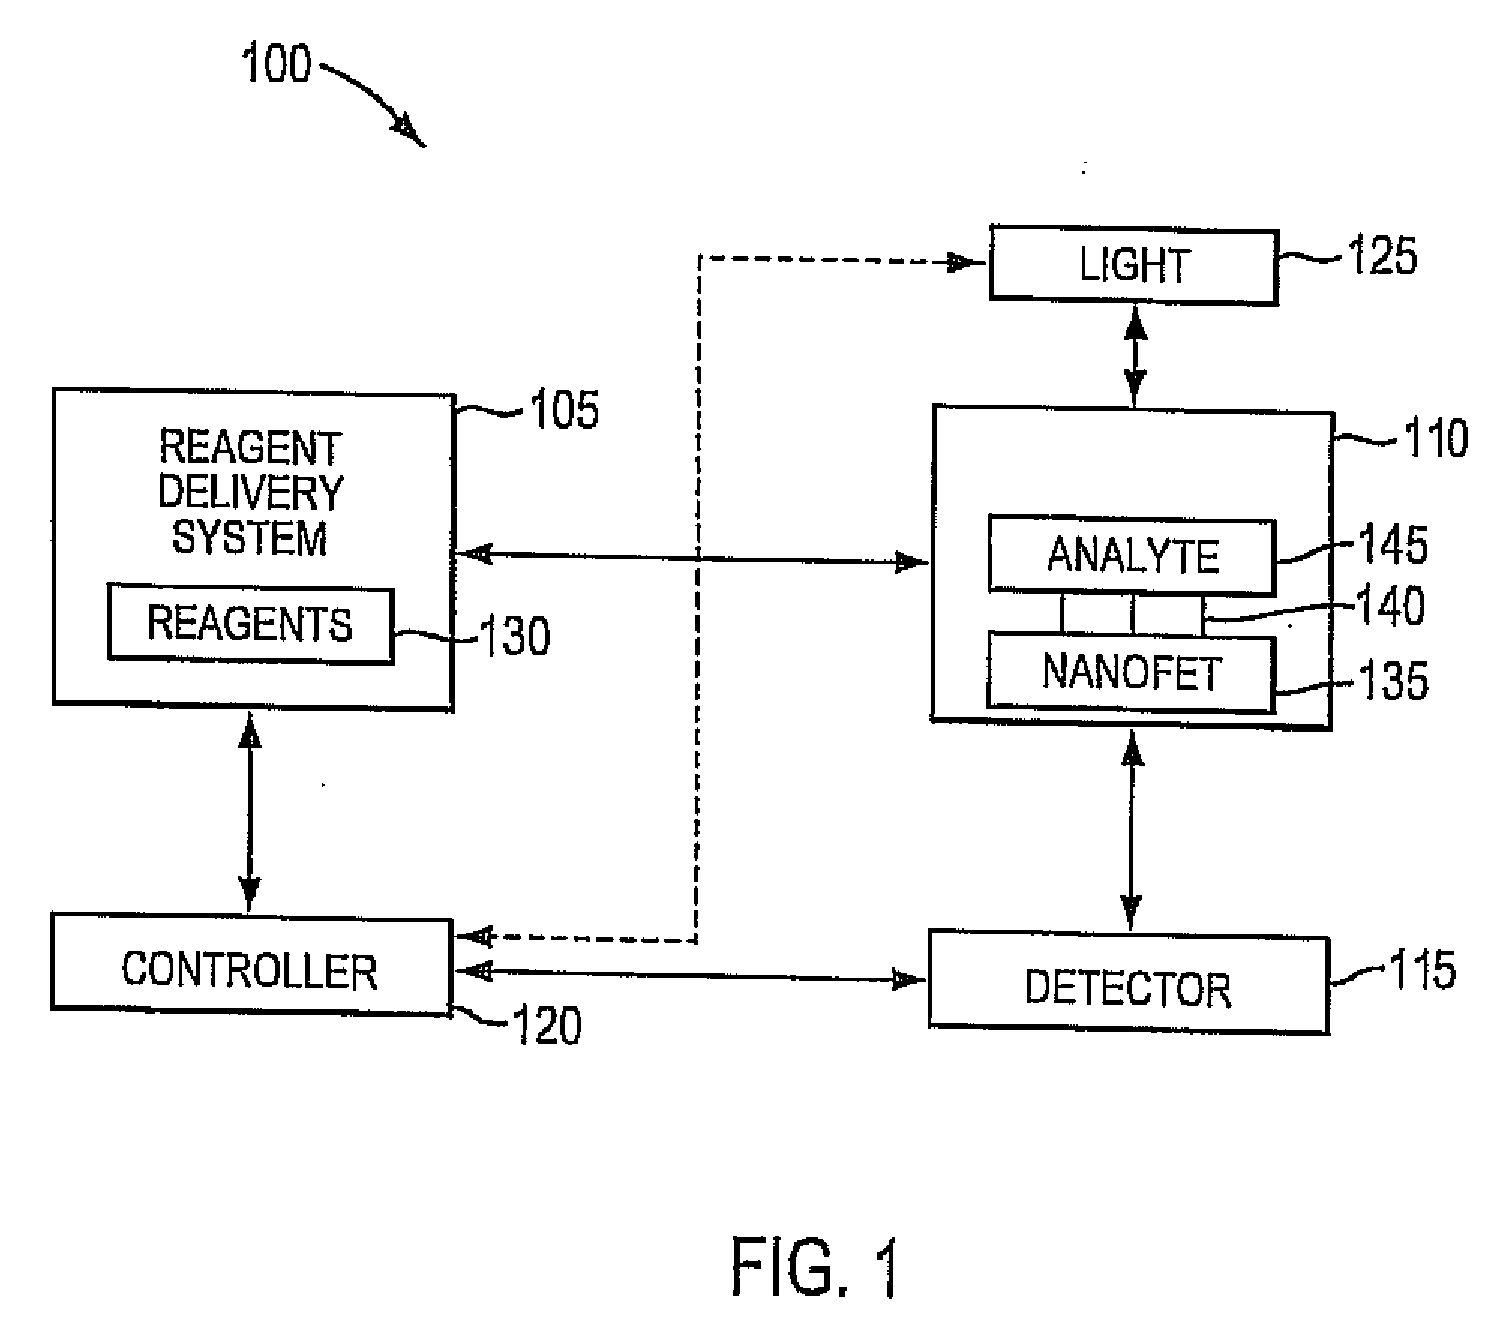 Systems and methods for electronic detection with nanofets